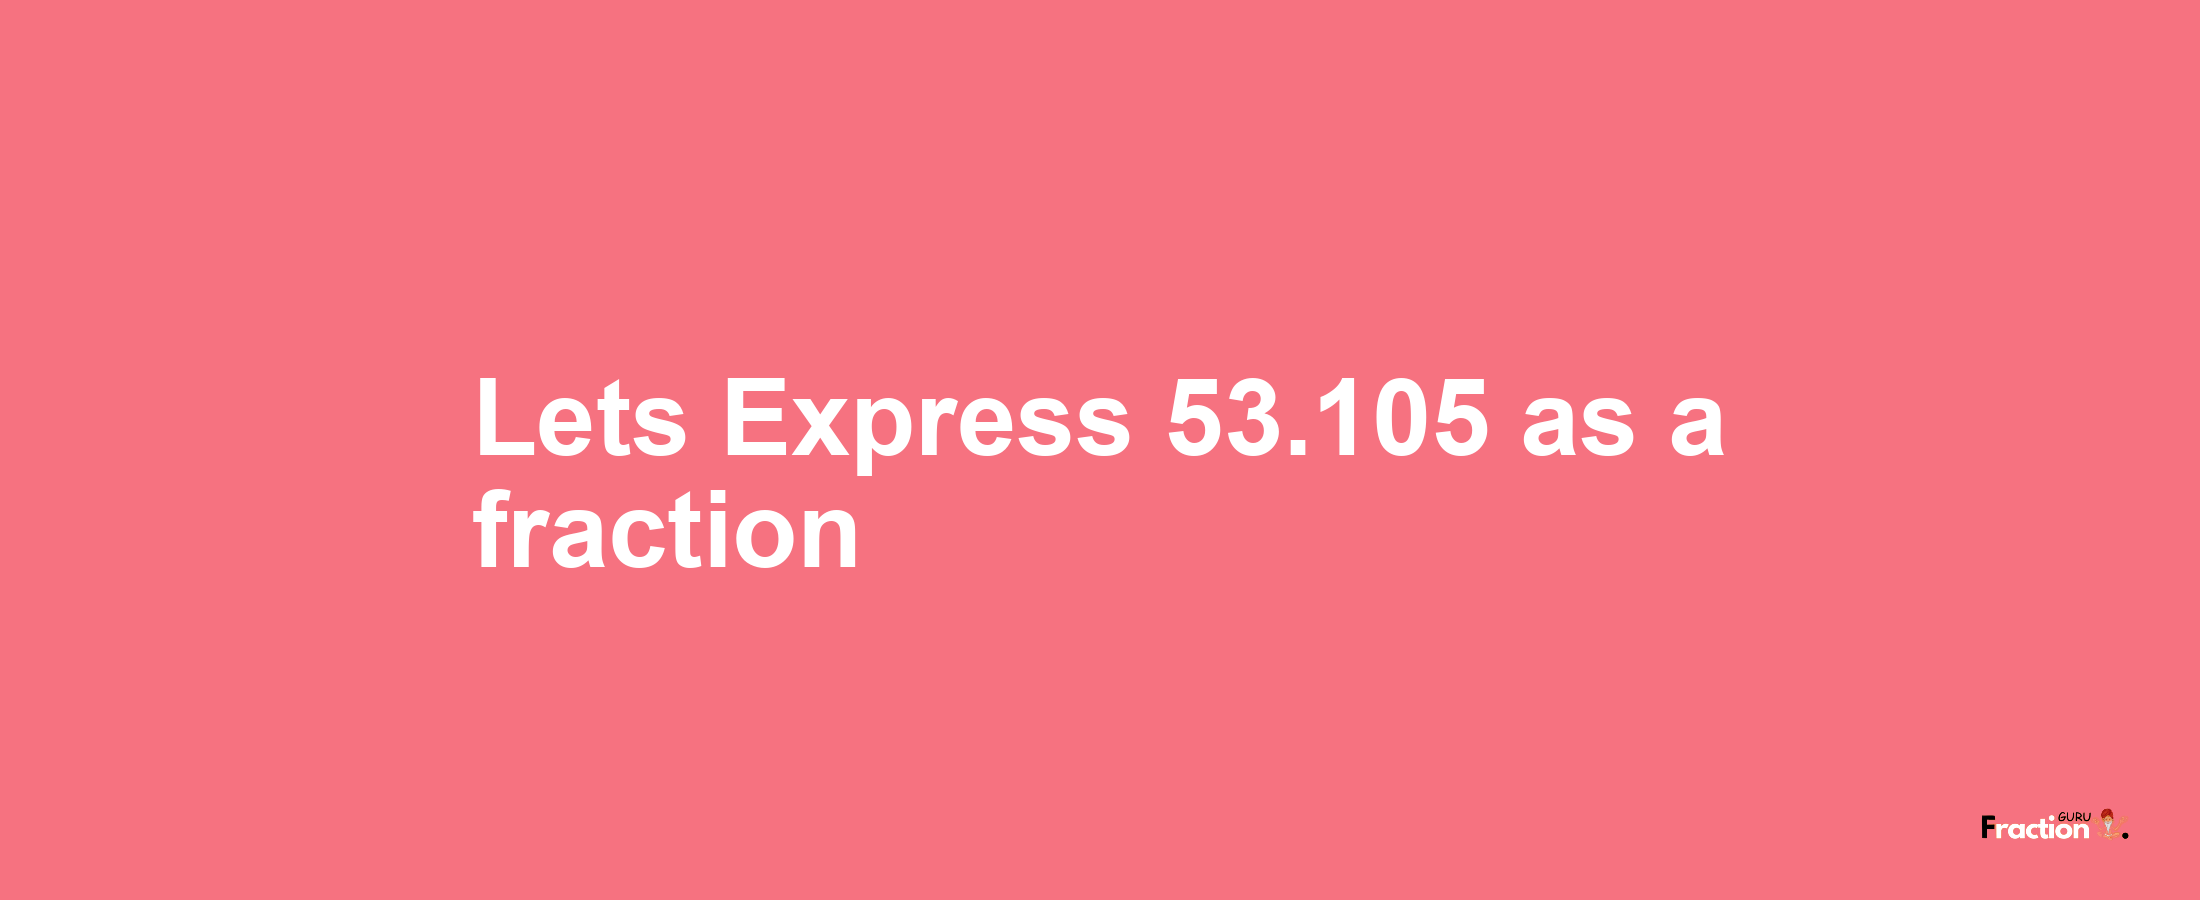 Lets Express 53.105 as afraction